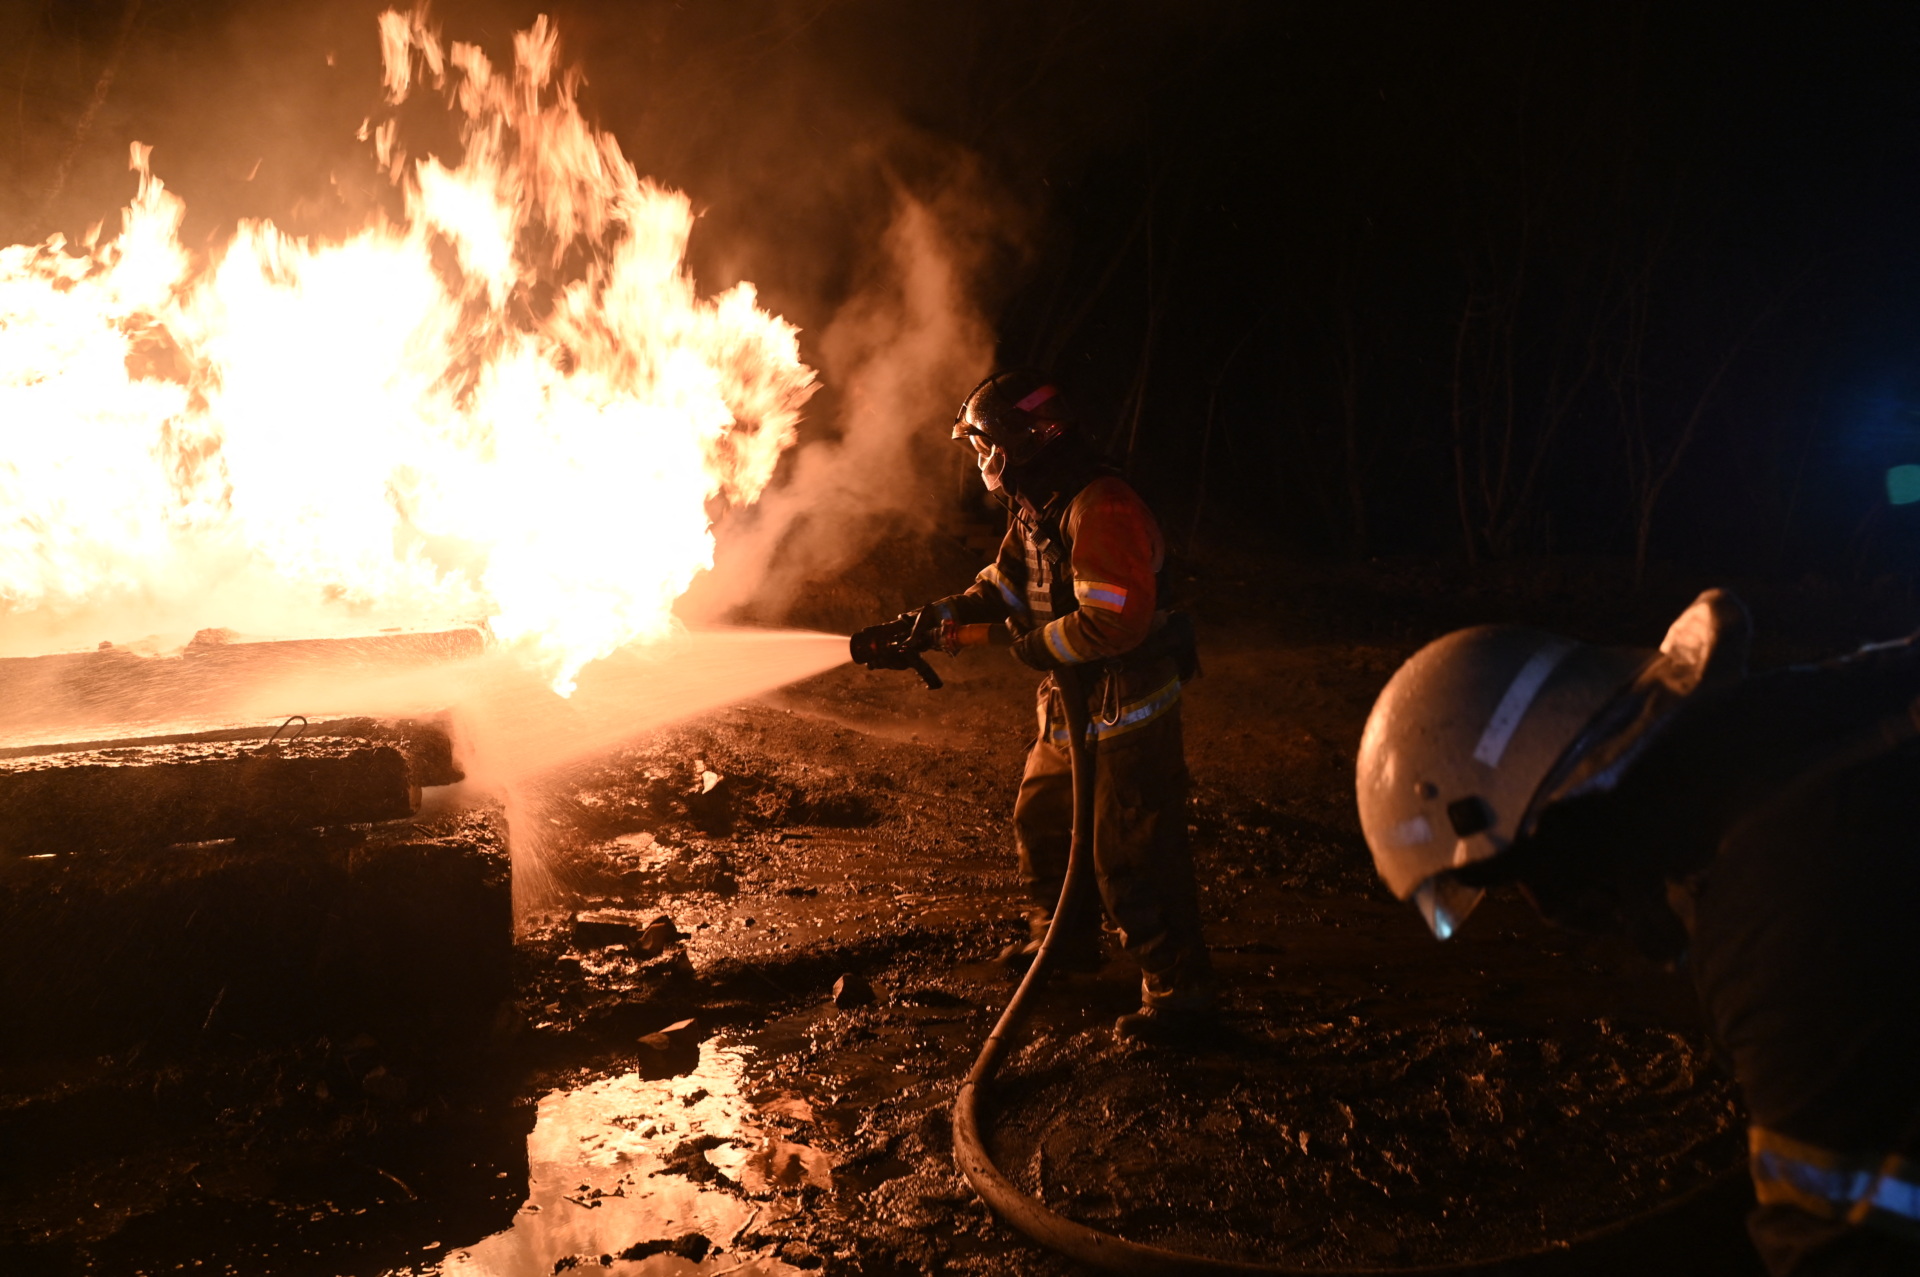 Ukrainian emergency personnel douse water to extinguish flames as they work at the site of a drone attack in Kharkiv, early on February 10, 2024. Seven people, including three children, were killed Saturday in a Russian drone attack on the city of Kharkiv in eastern Ukraine, the regional governor said. "Unfortunately the death toll from the occupiers' attacks on Kharkiv has risen to seven," Oleg Synegubov said on the Telegram social network. "Among them are three children: 7, 4 years old and a baby about six months old." (Photo by SERGEY BOBOK / AFP) (Photo by SERGEY BOBOK/AFP via Getty Images)